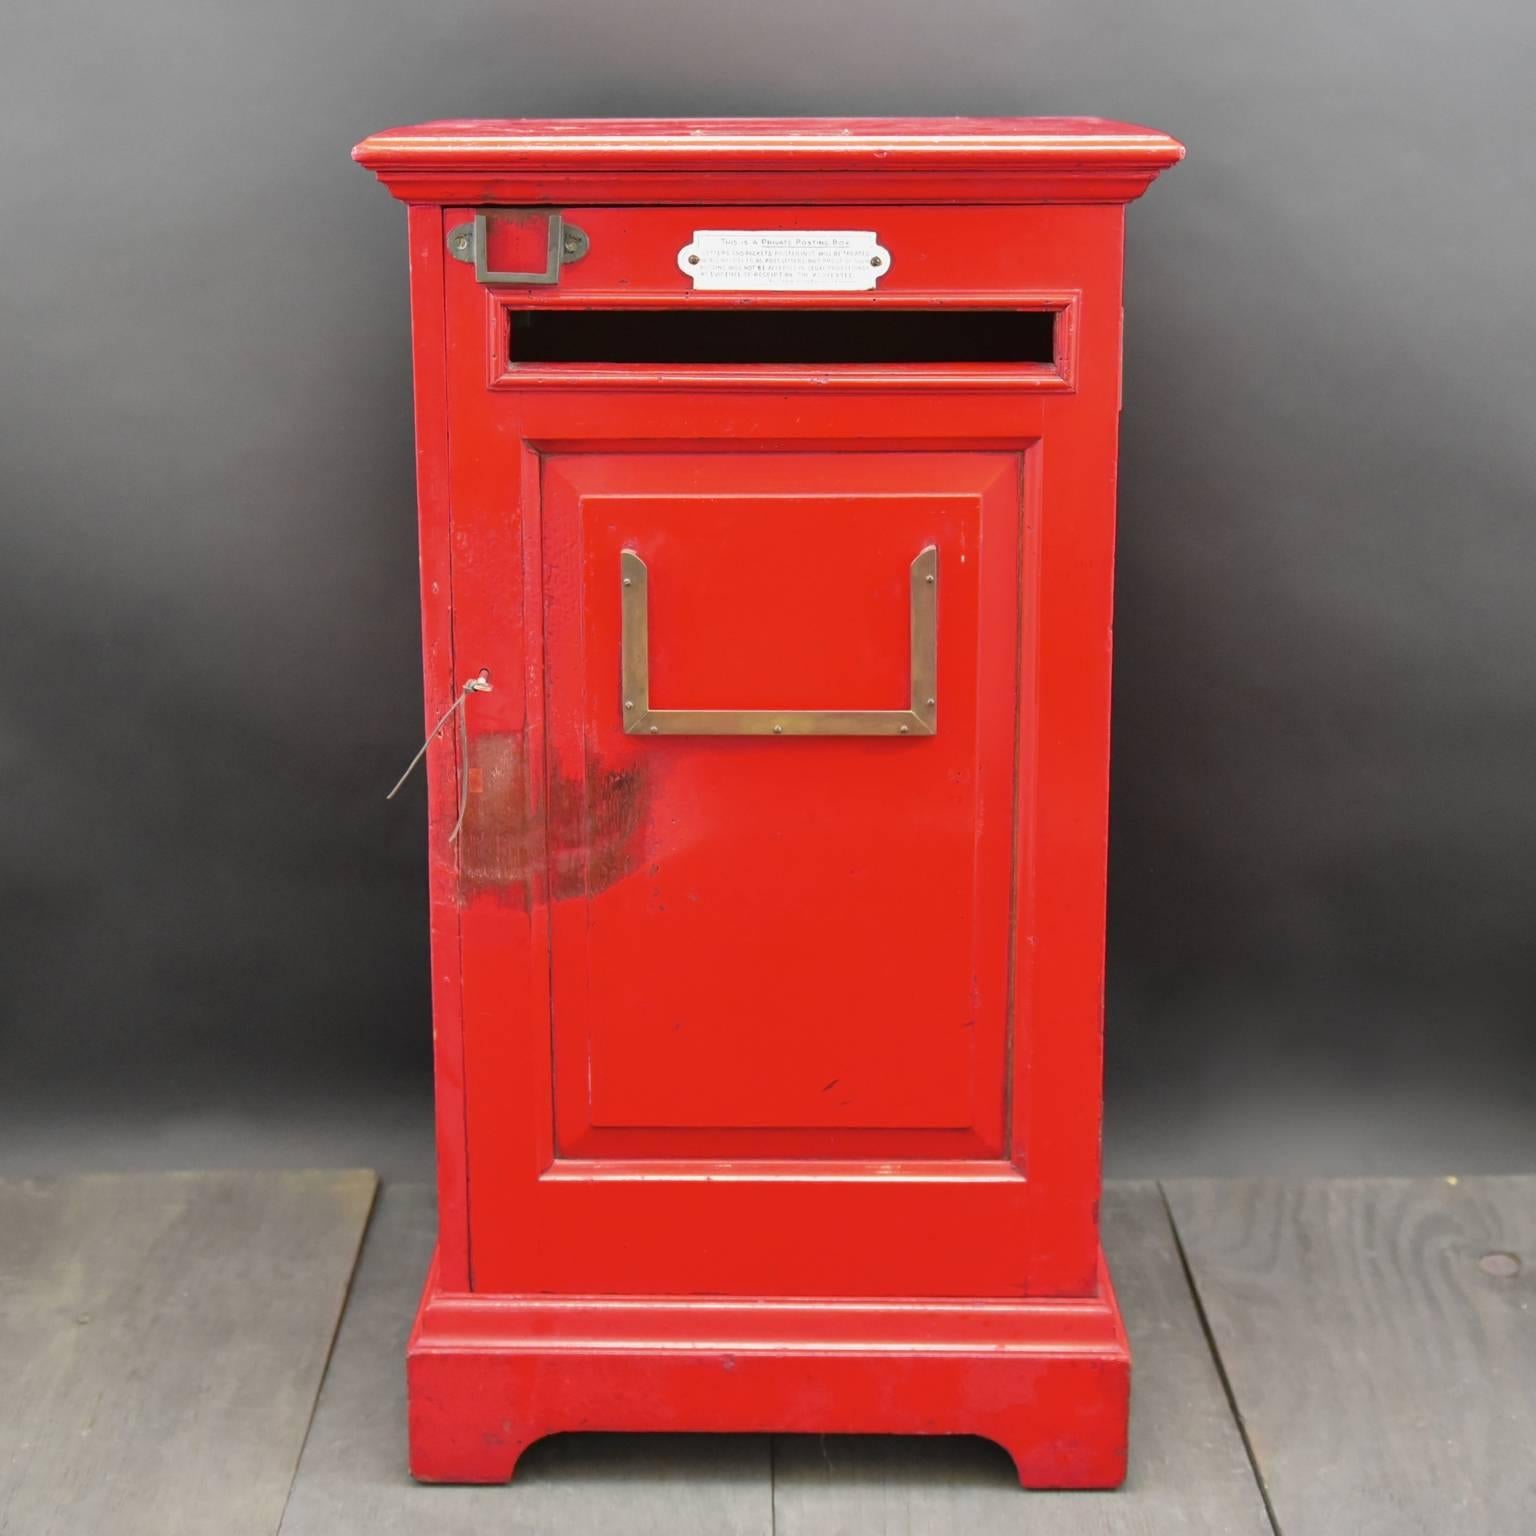 A fantastic painted wooden private post box likely to have been made for a hotel, business, club or a country house. It would have been emptied twice a day and the contents taken to the local Post Office, circa 1925.

Bentleys are Members of LAPADA,